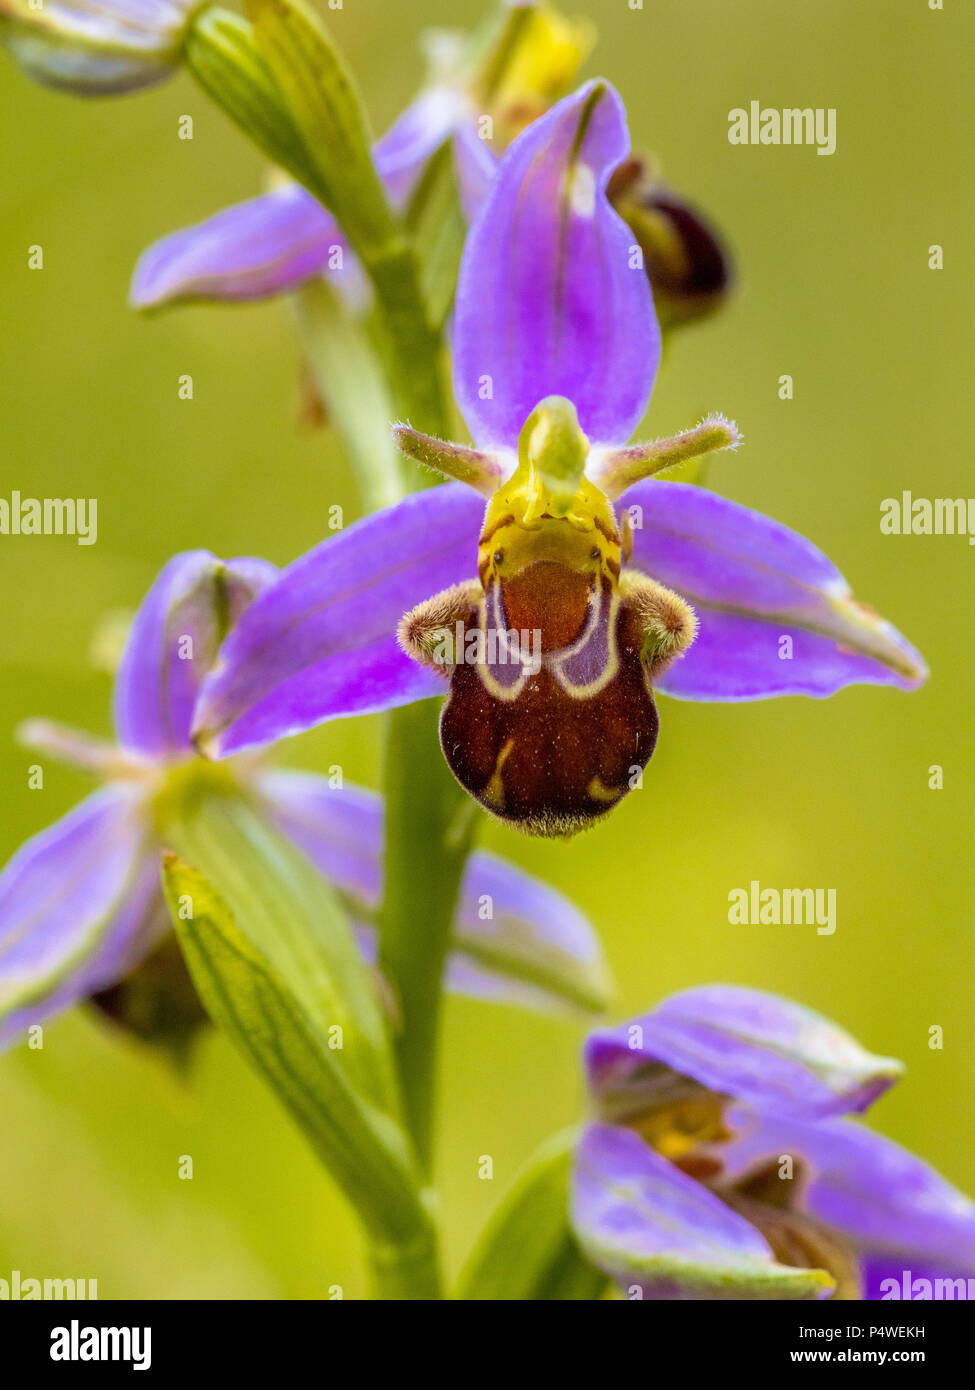 Bee orchid (Ophrys apifera)  pink flower mimicing humblebee insects to polinate the flower. On blurred green background Stock Photo